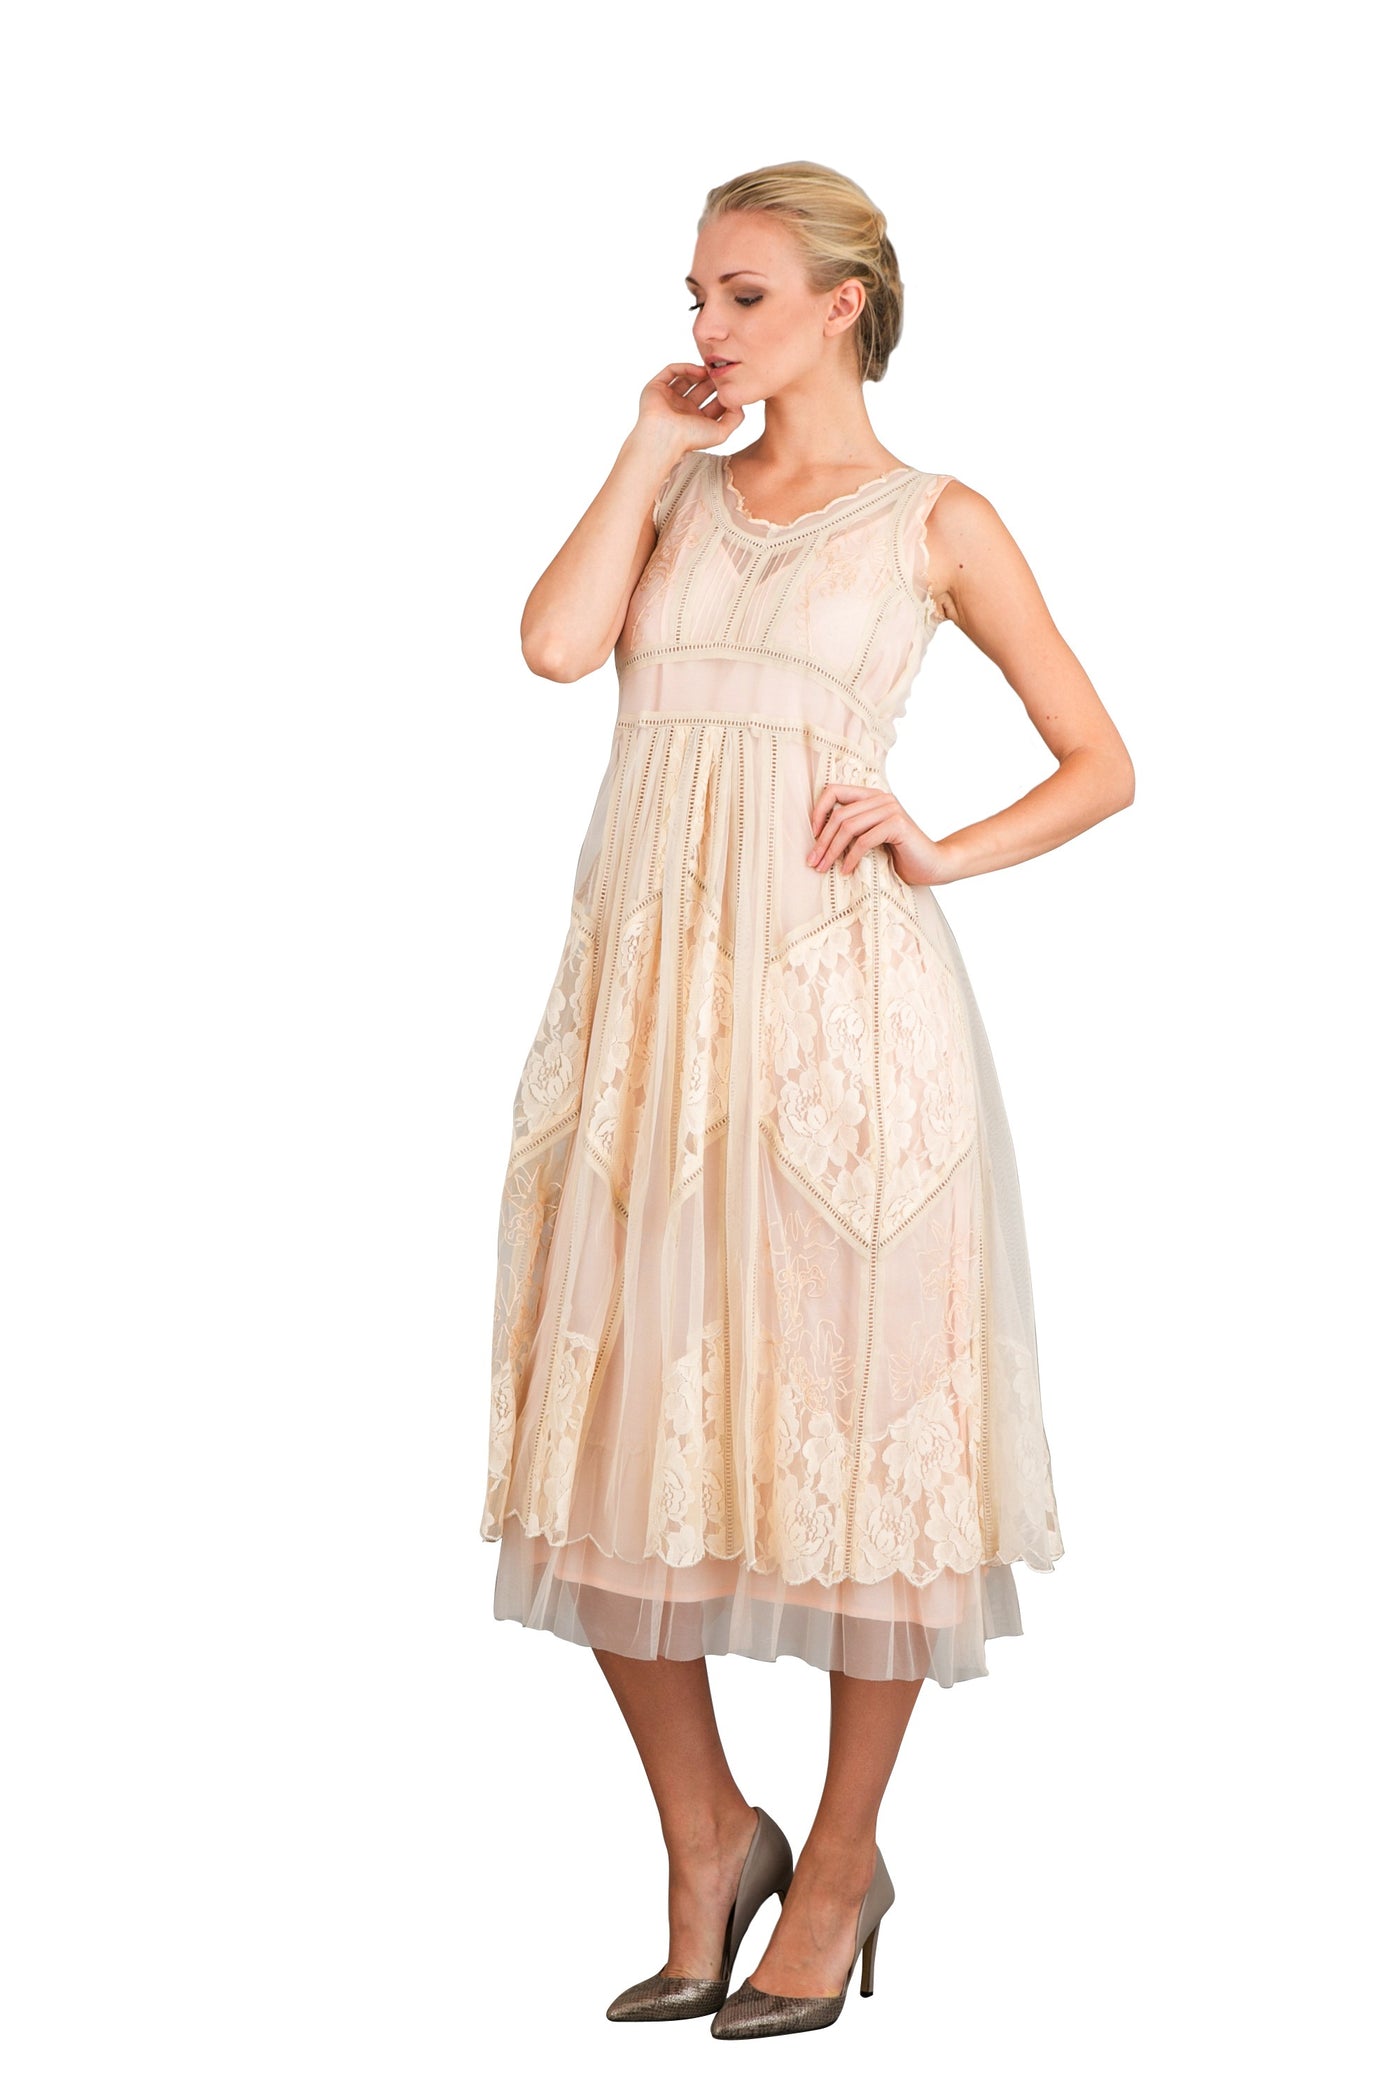 Romantic Vintage Style Sleeveless Dress in Ecru by Nataya - SOLD OUT